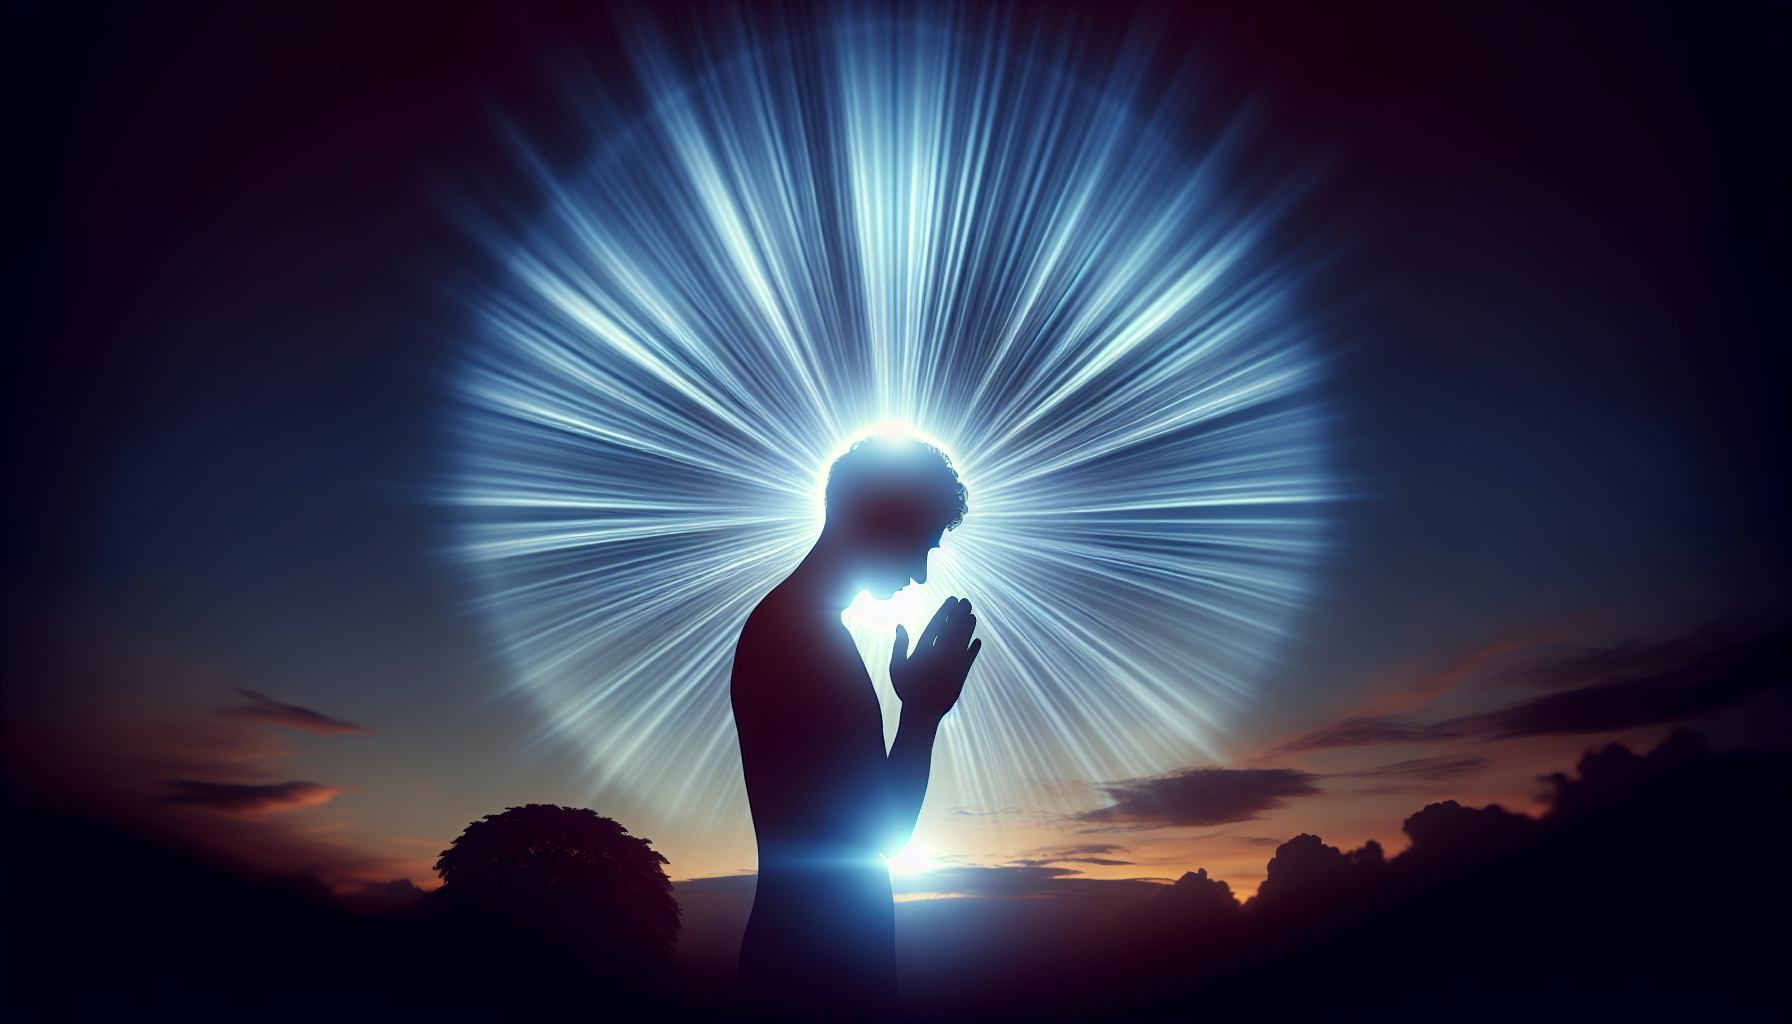 A person praying with hands clasped and head bowed in a beam of light